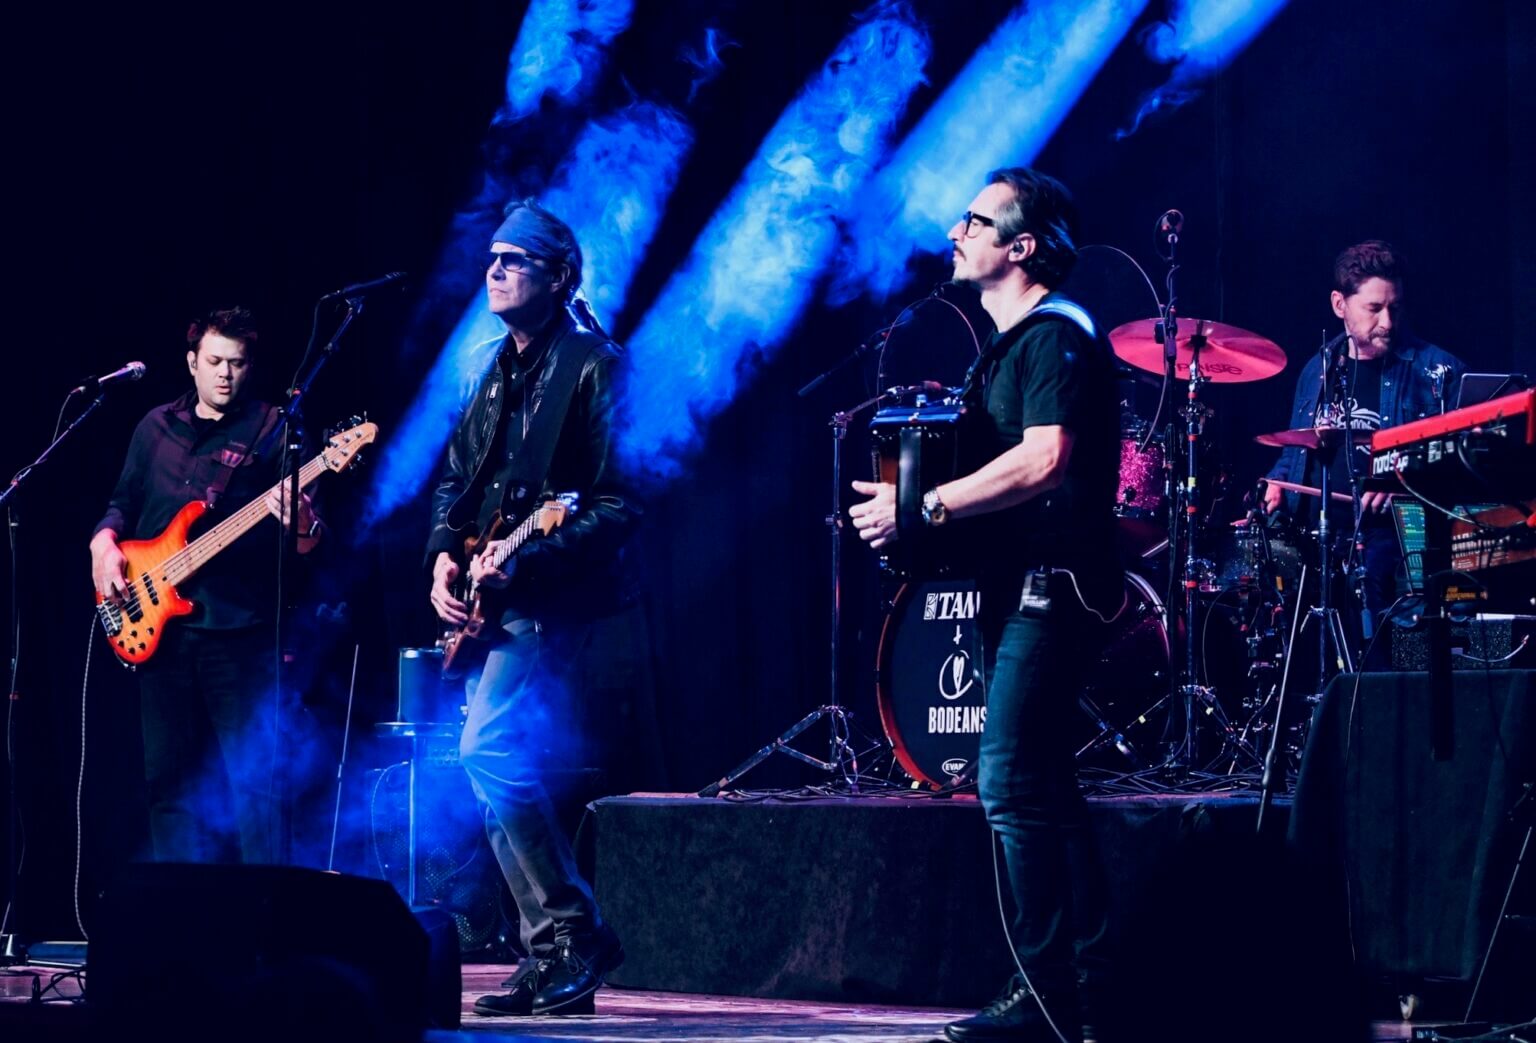 BoDeans to perform at the Mahaiwe